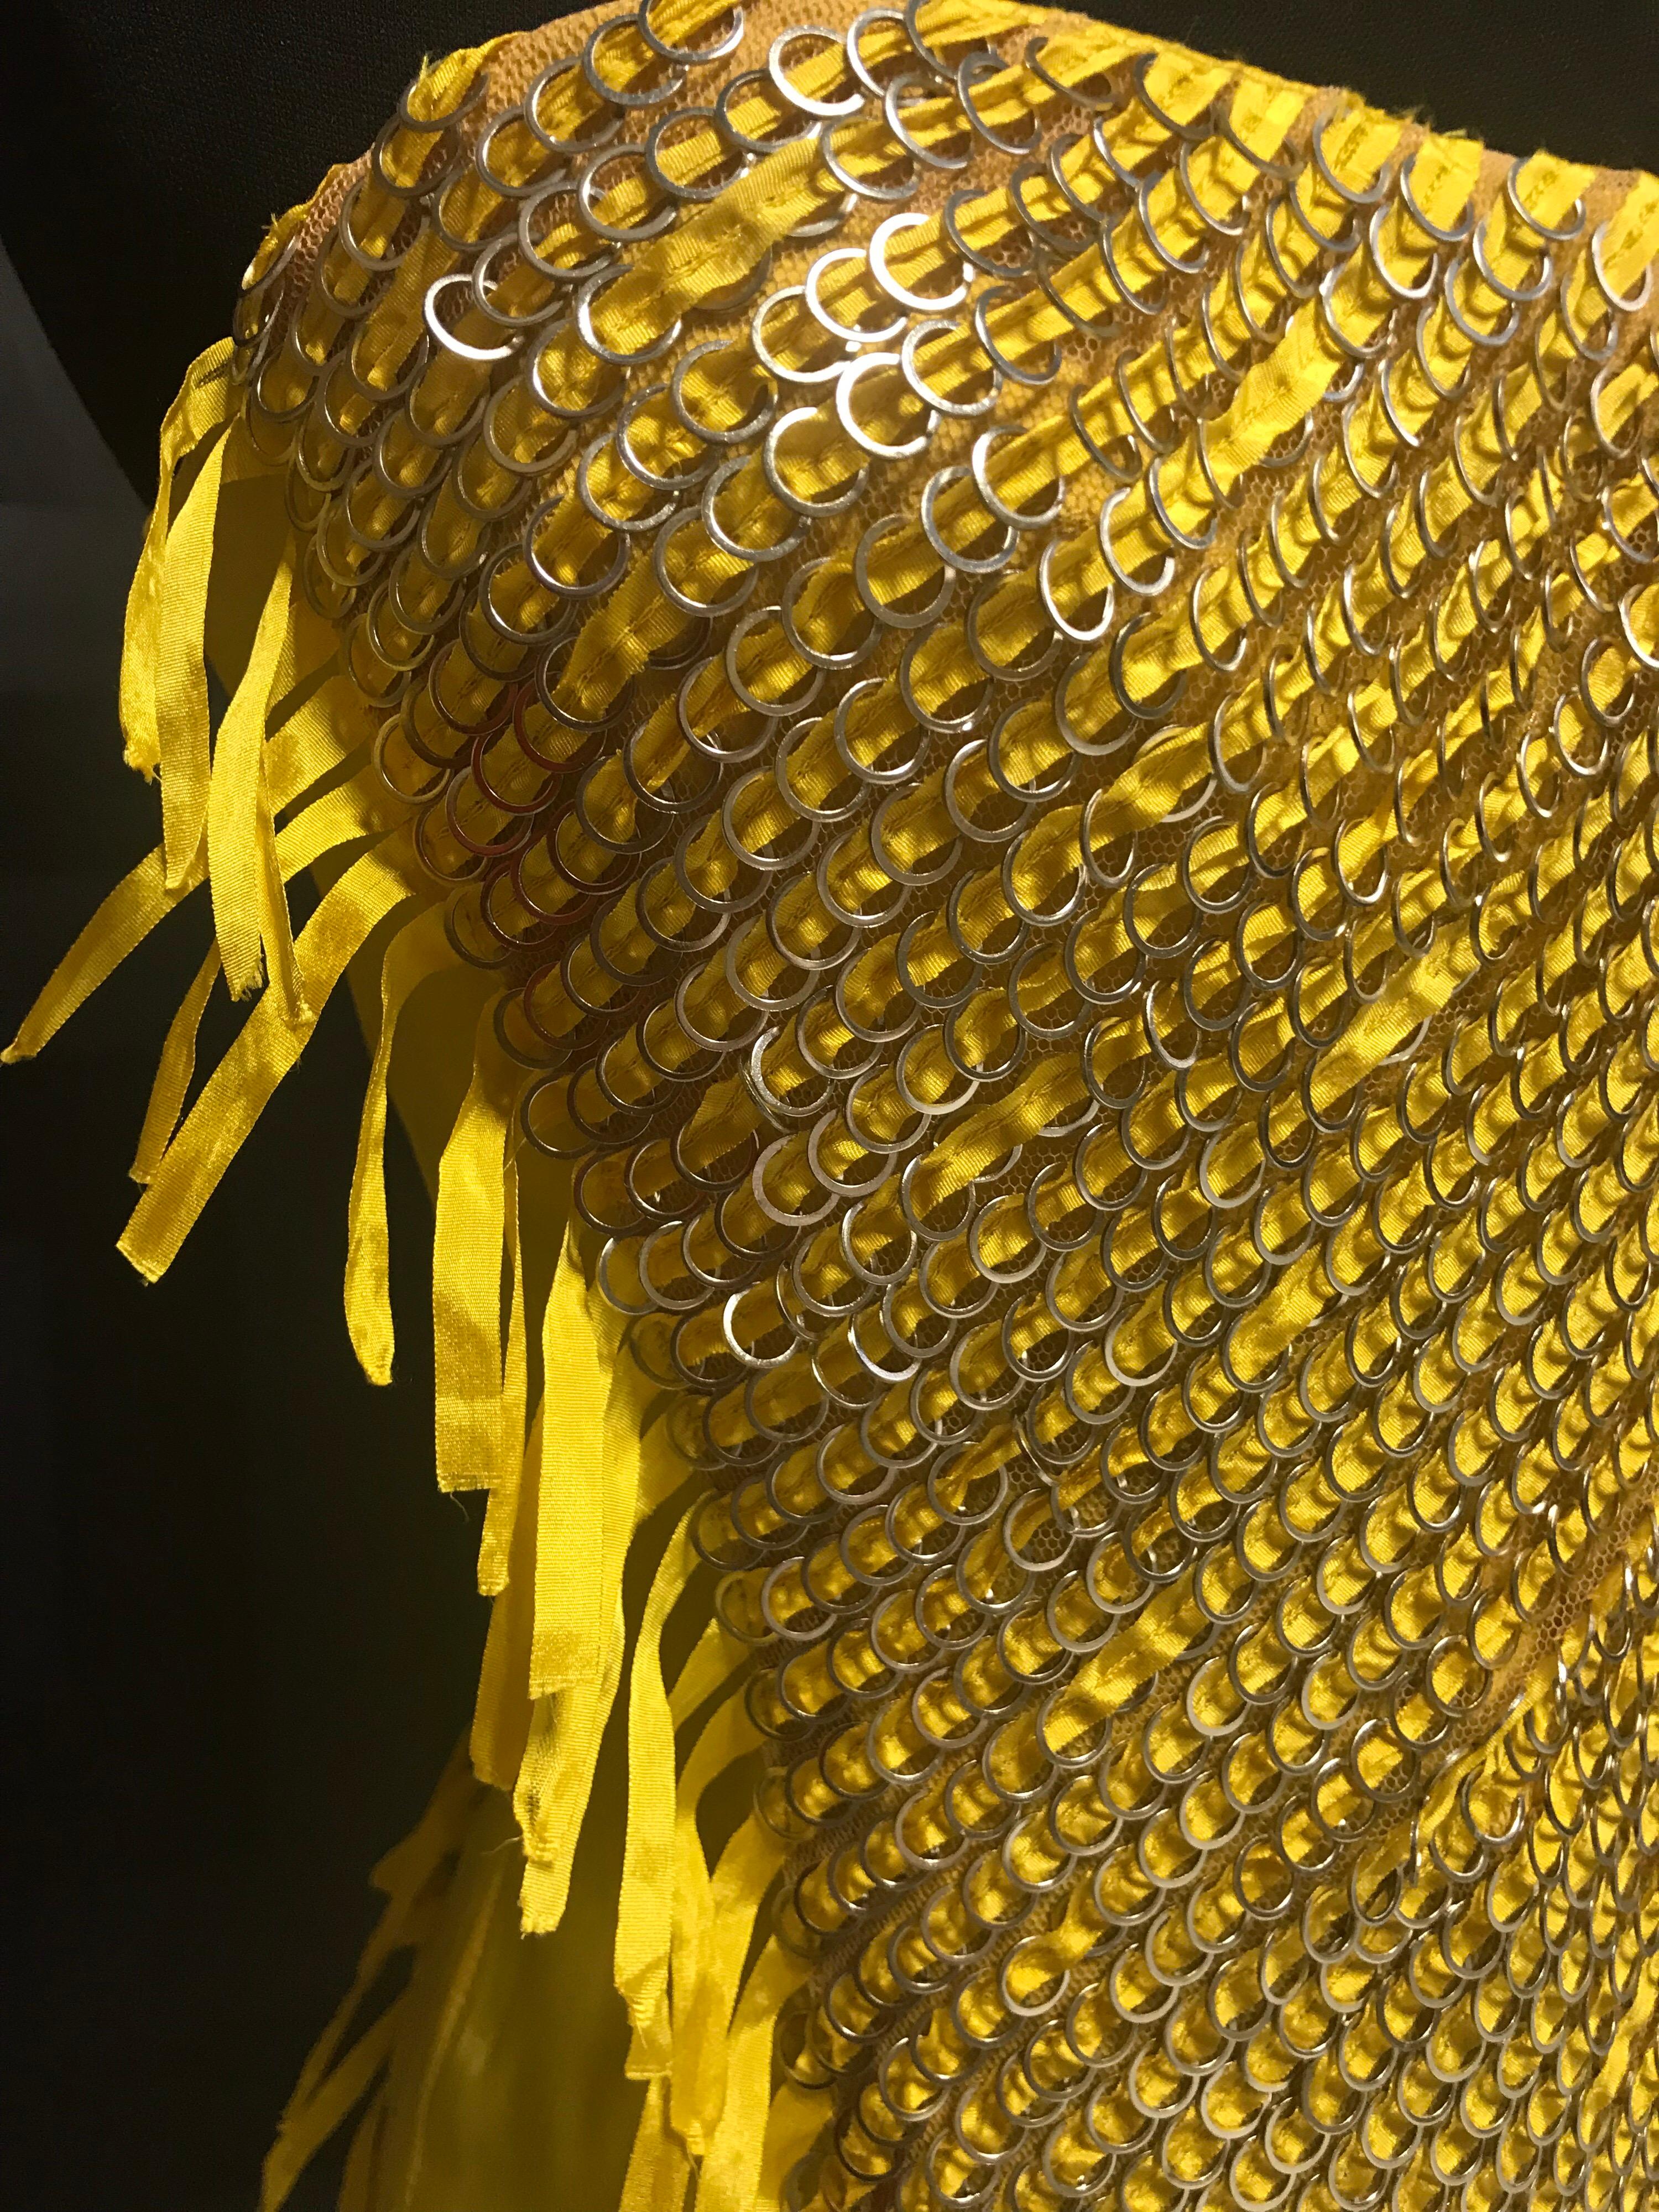 Yellow S/S 2004 Tom Ford for Gucci Embellished Silk Dress